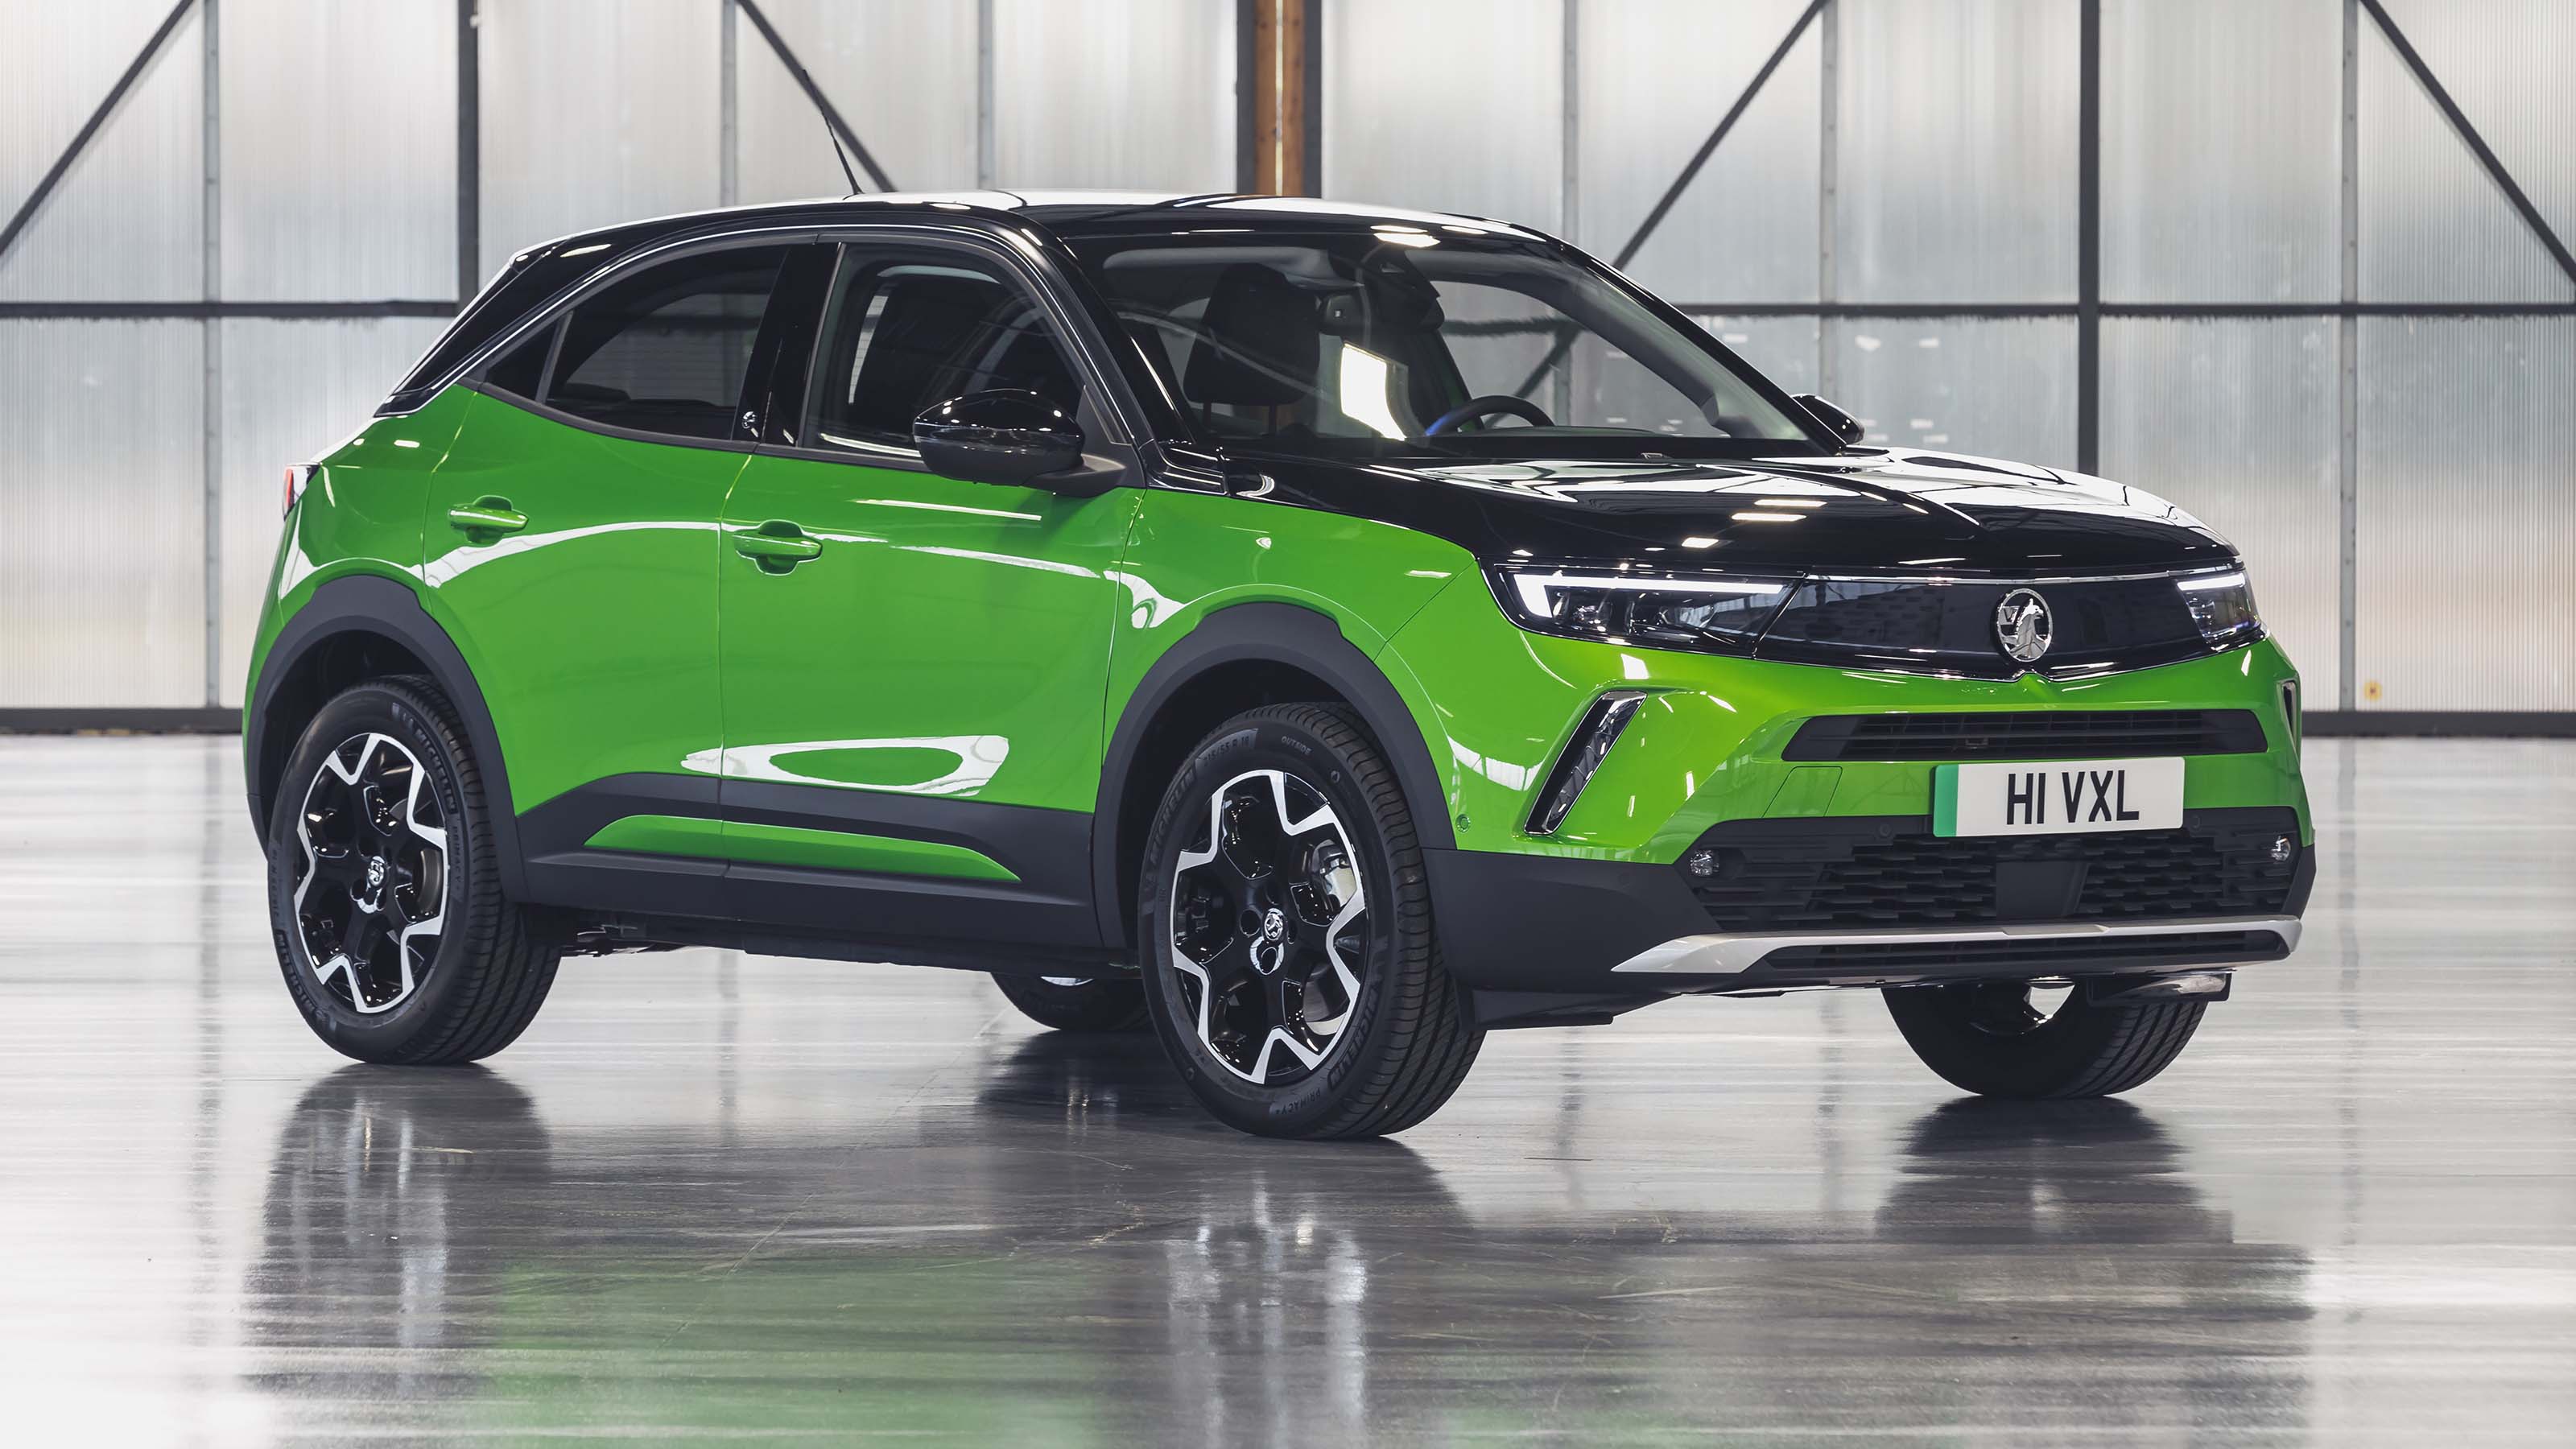 New Vauxhall Mokkae electric SUV price, specs and details